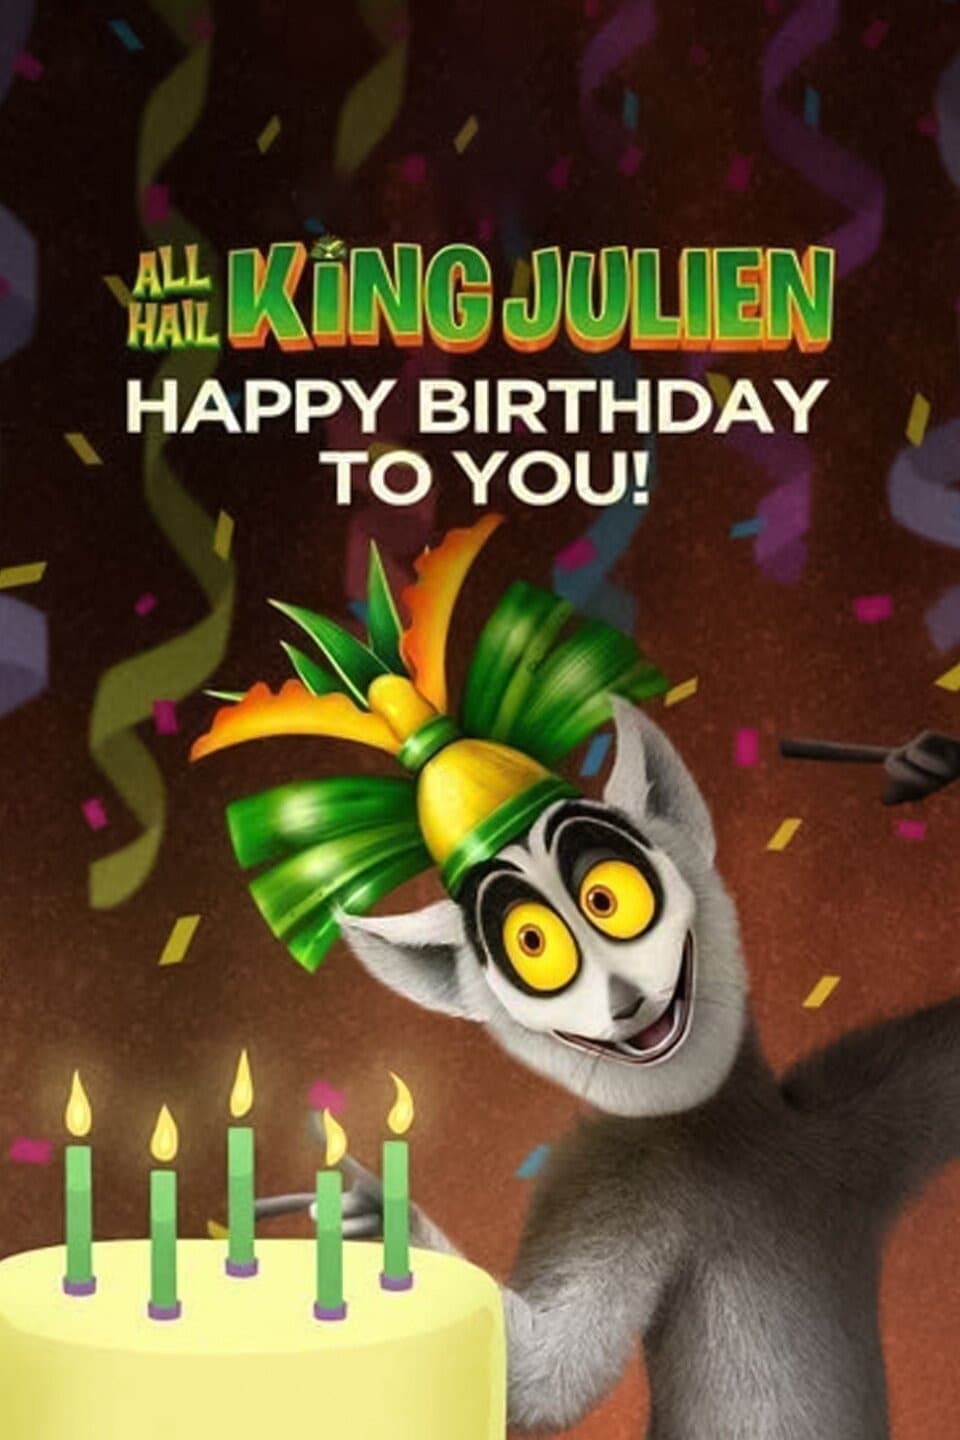 All Hail King Julien: Happy Birthday to You